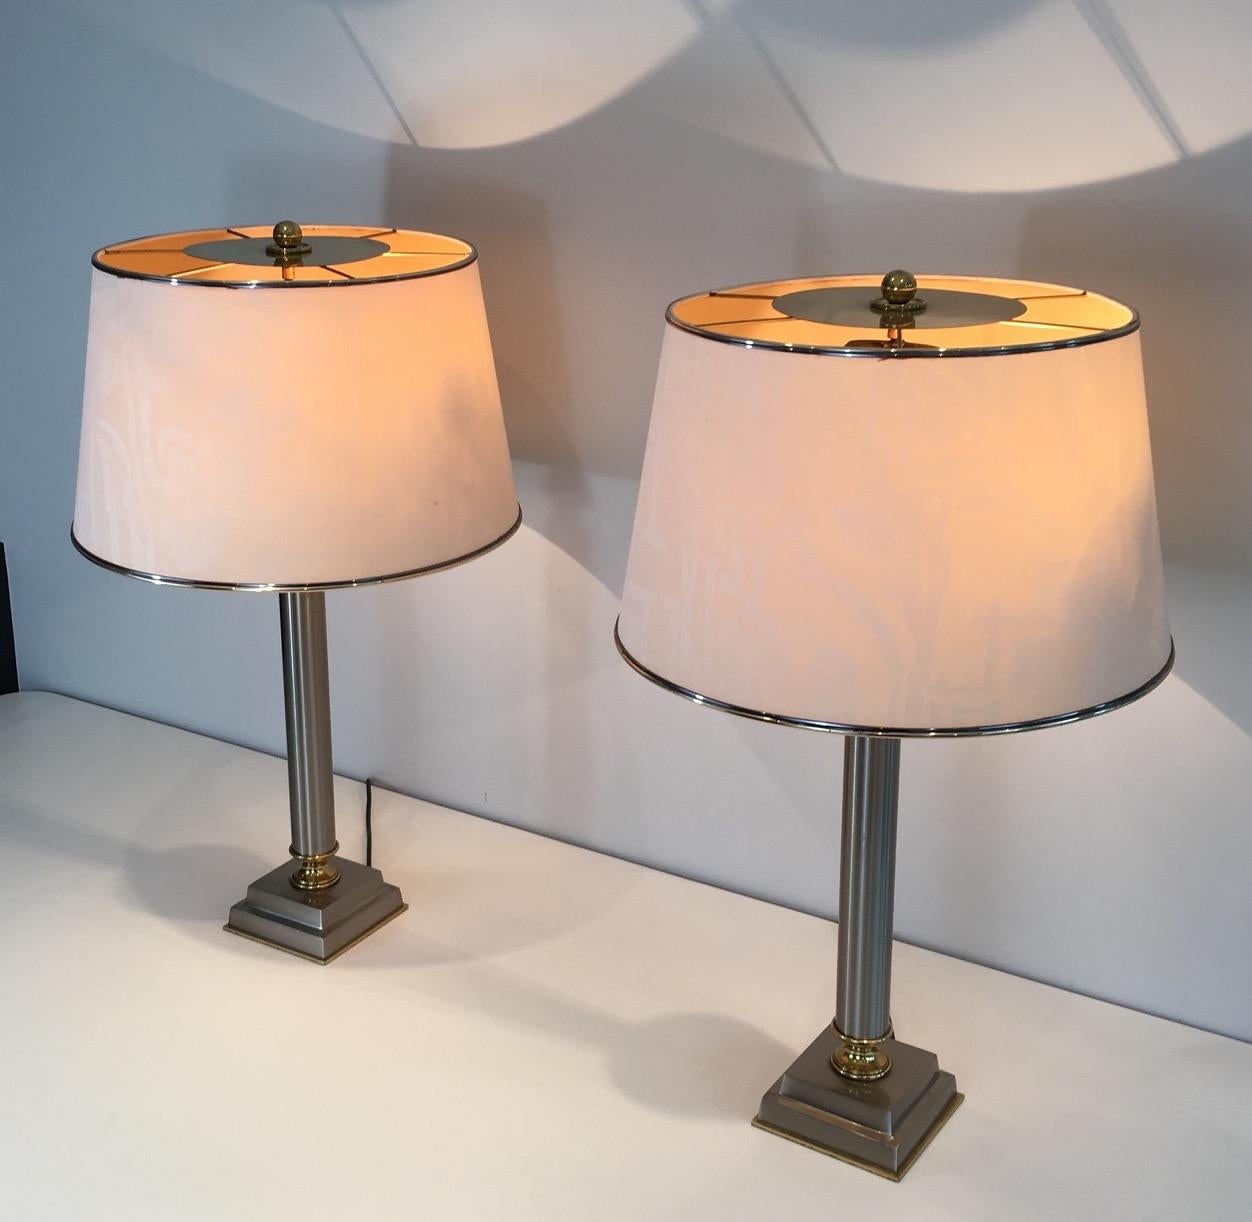 This important pair of table lamps is made of brushed steel and brass. These lamps are very simple with pure lines, in the style of neoclassical pieces but with a modern look. The shades can be reclined. This is a rare model by Guy Lefèvre, circa